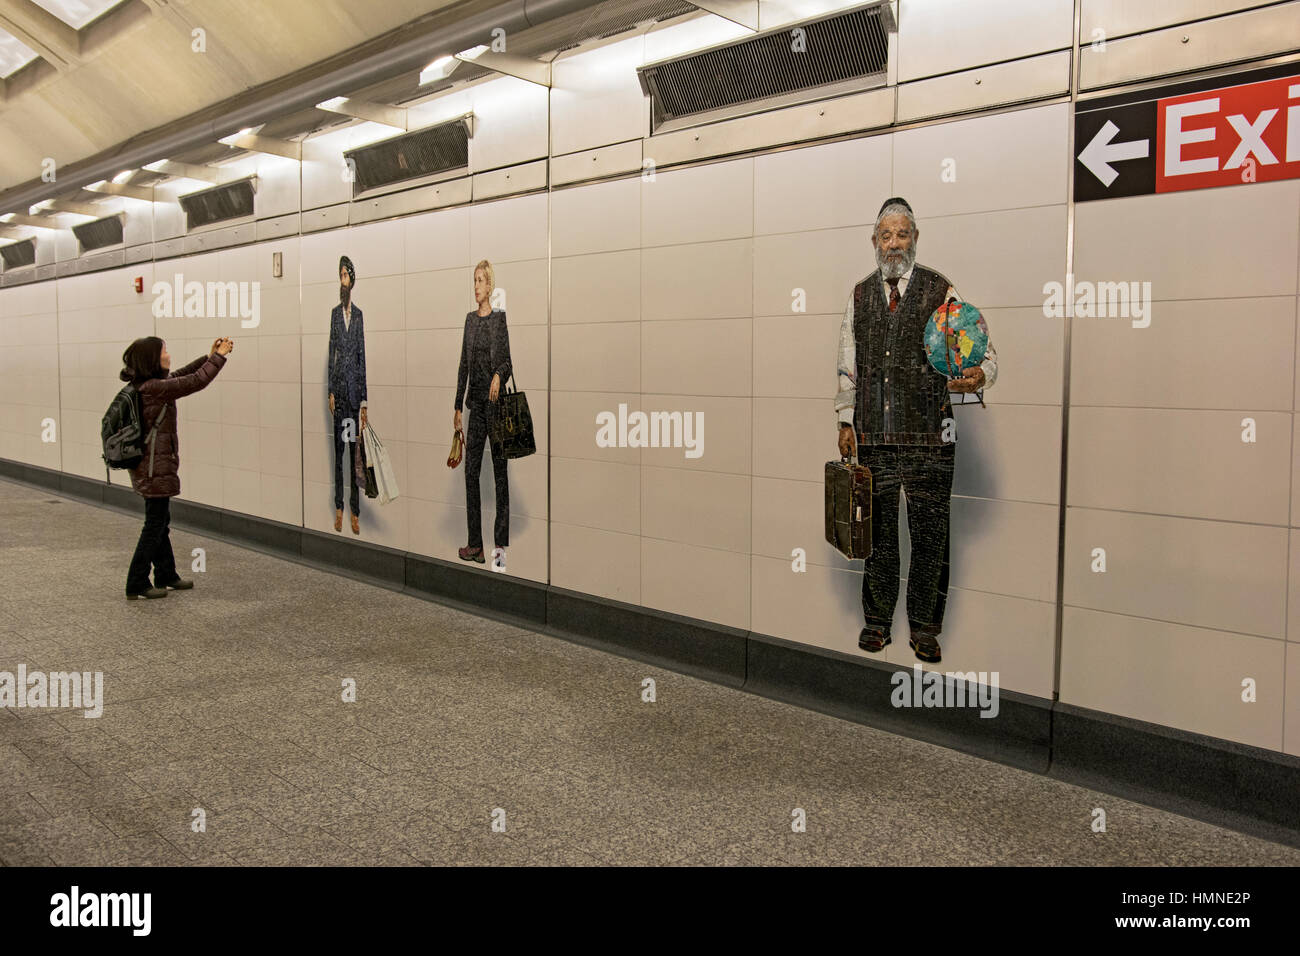 Subway art at the 73nd Street Station on the Q line in Manhattan, New York City. Stock Photo